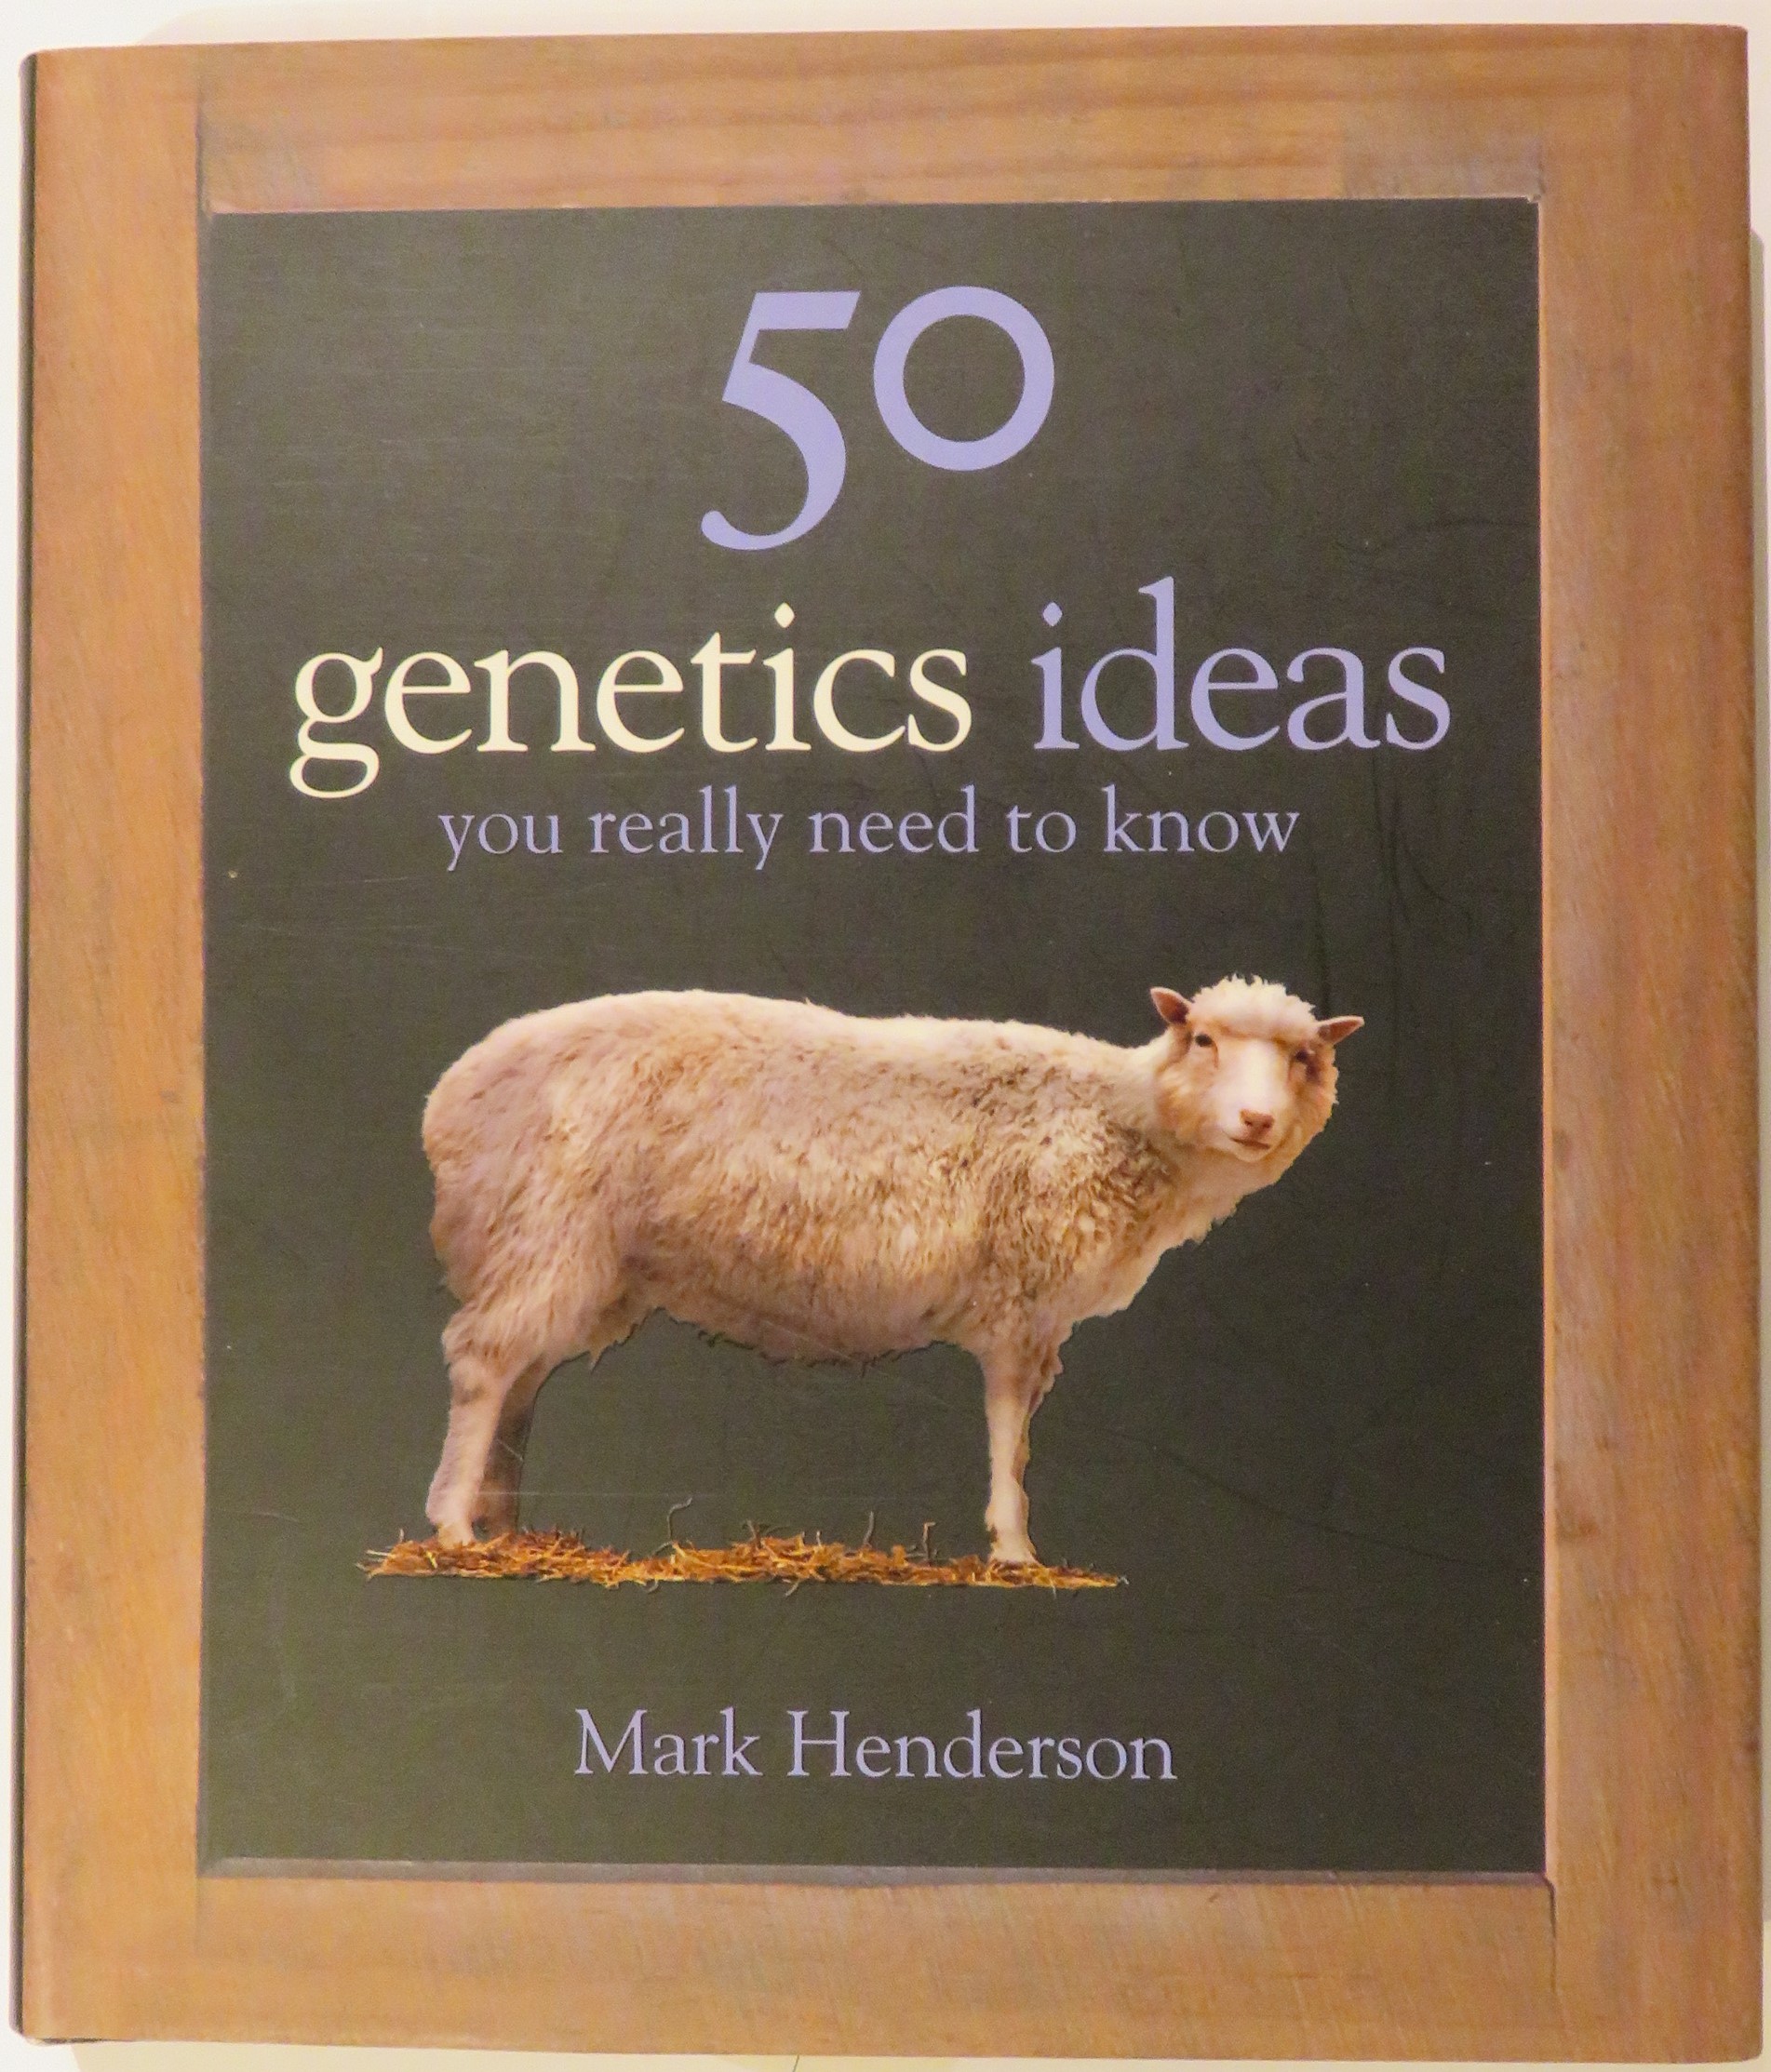 50 Genetic Ideas you really need to know